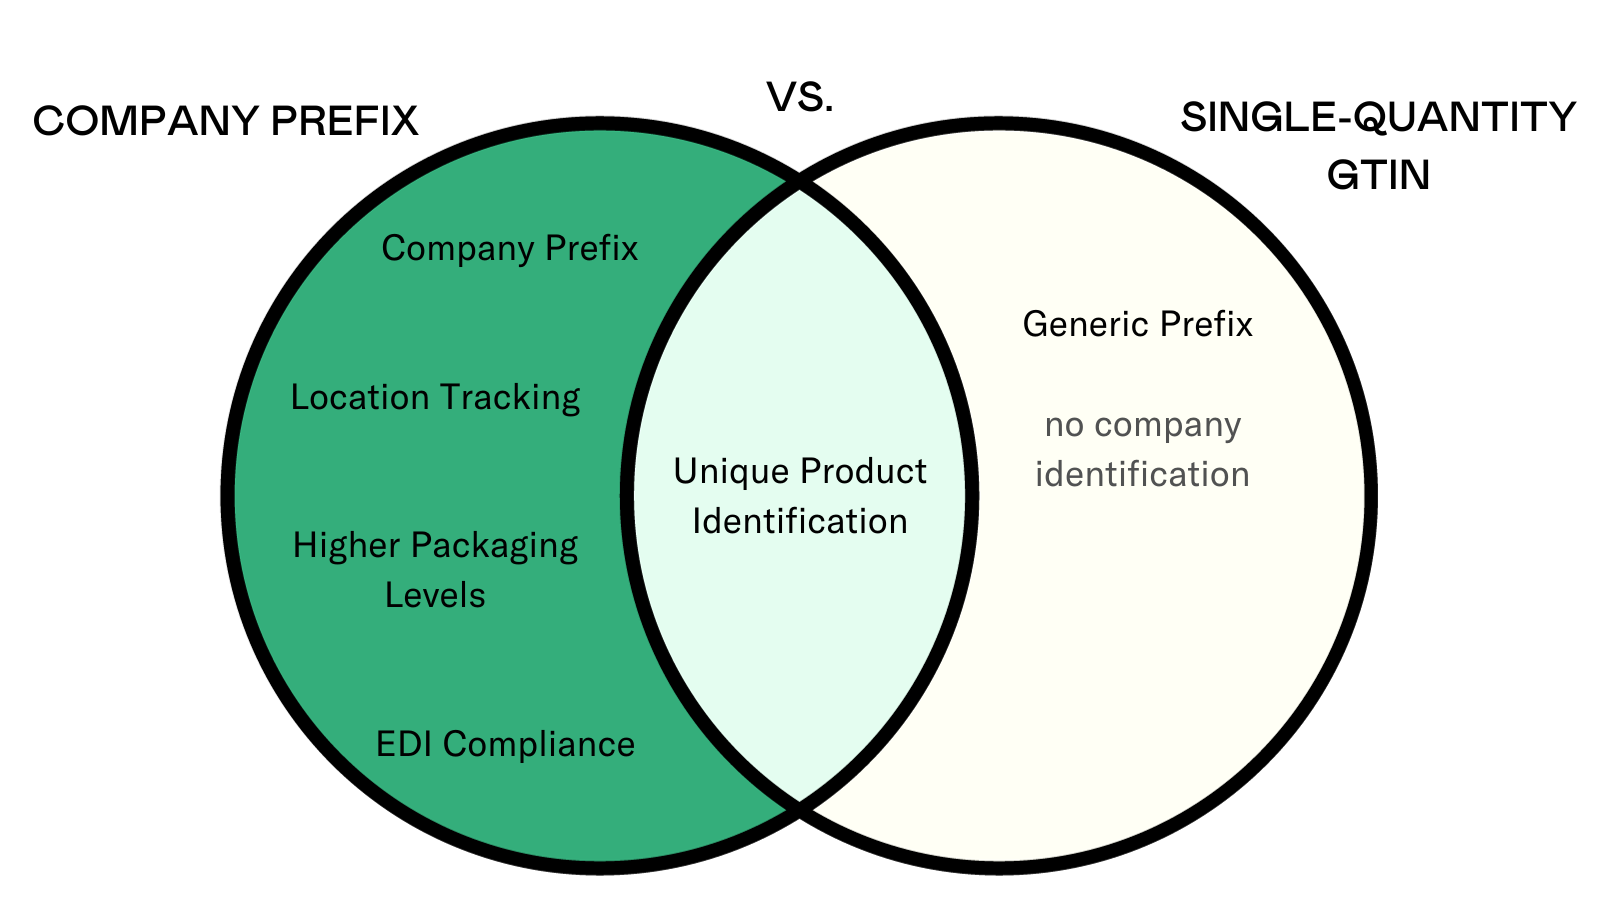 Difference between single quantity GTIN and Company Prefix